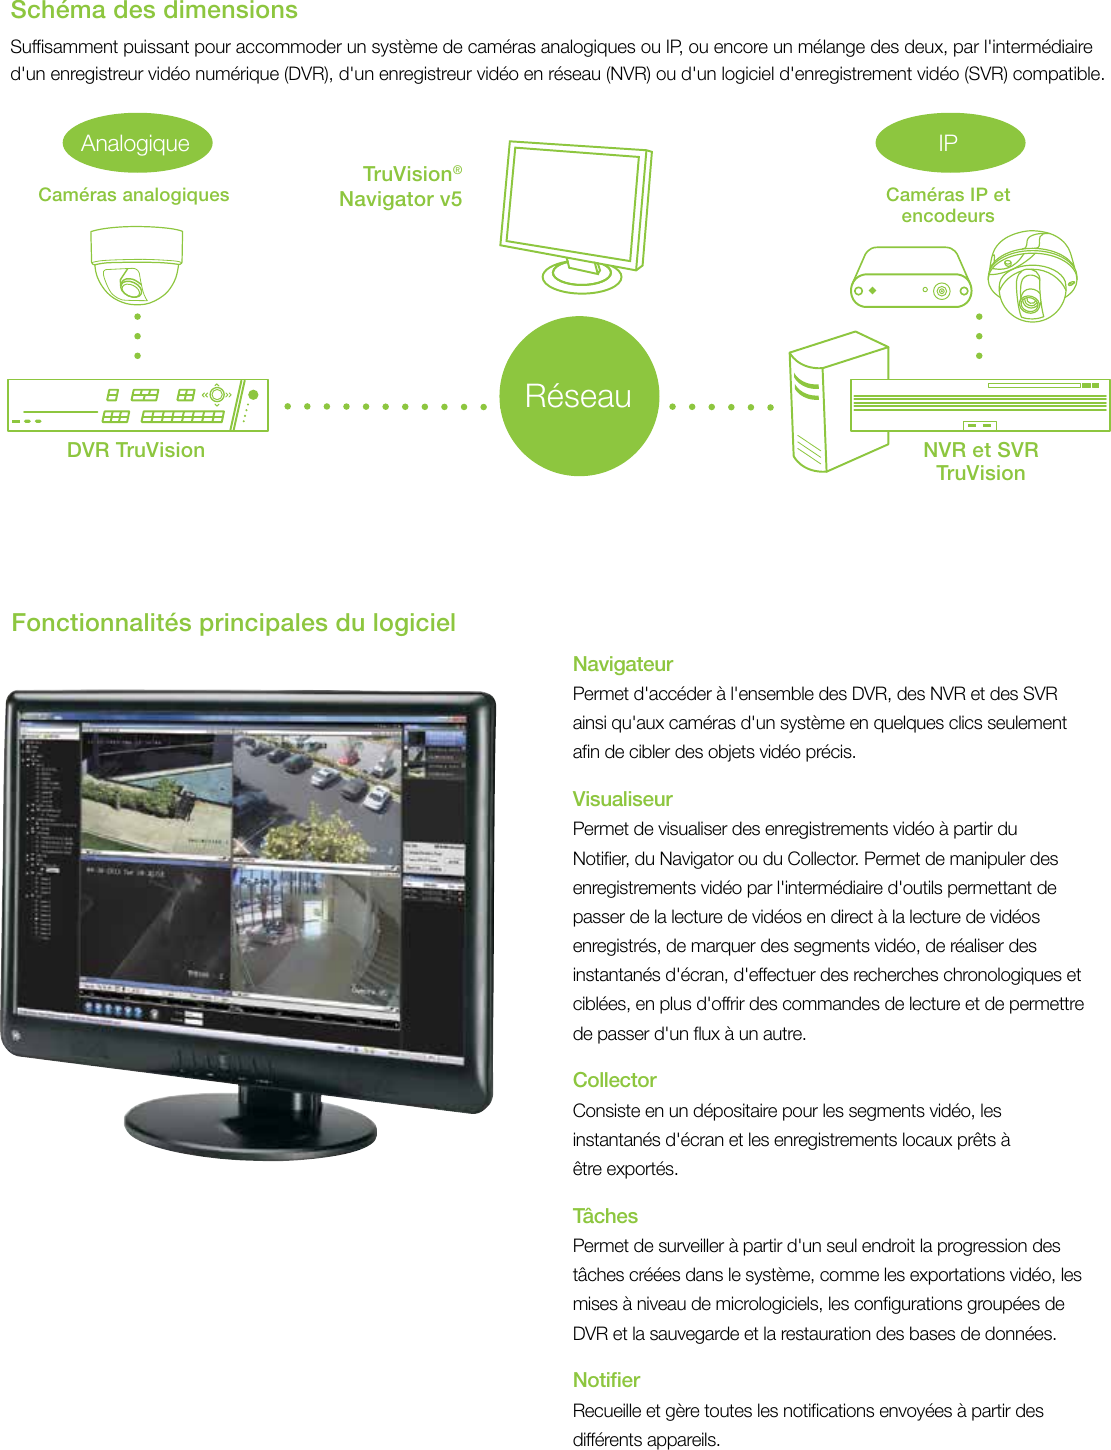 Page 3 of 6 - Data Sheet -- M5 Enclosure For Picture Perfect & Secure  78839 Truvision Nav V5 Ds Fr